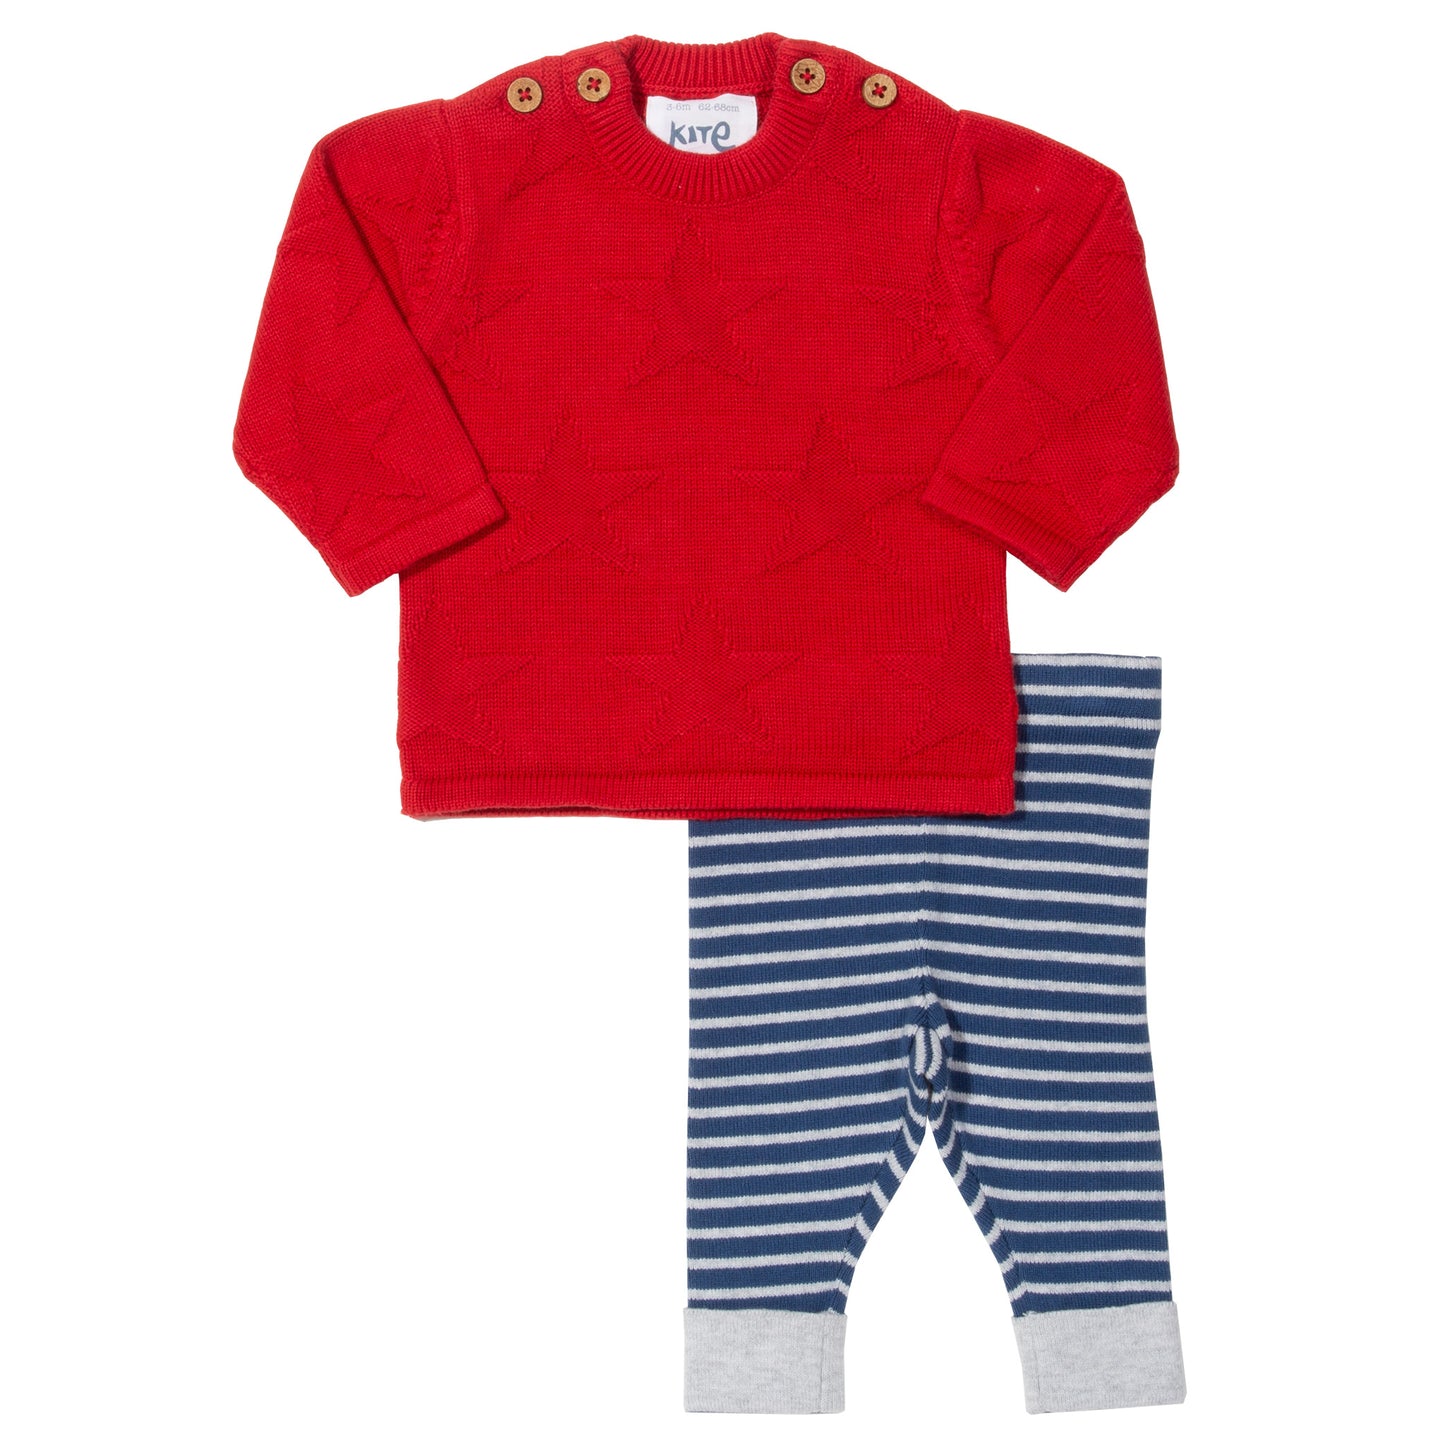 Red jumper with blue and white stripe bottoms